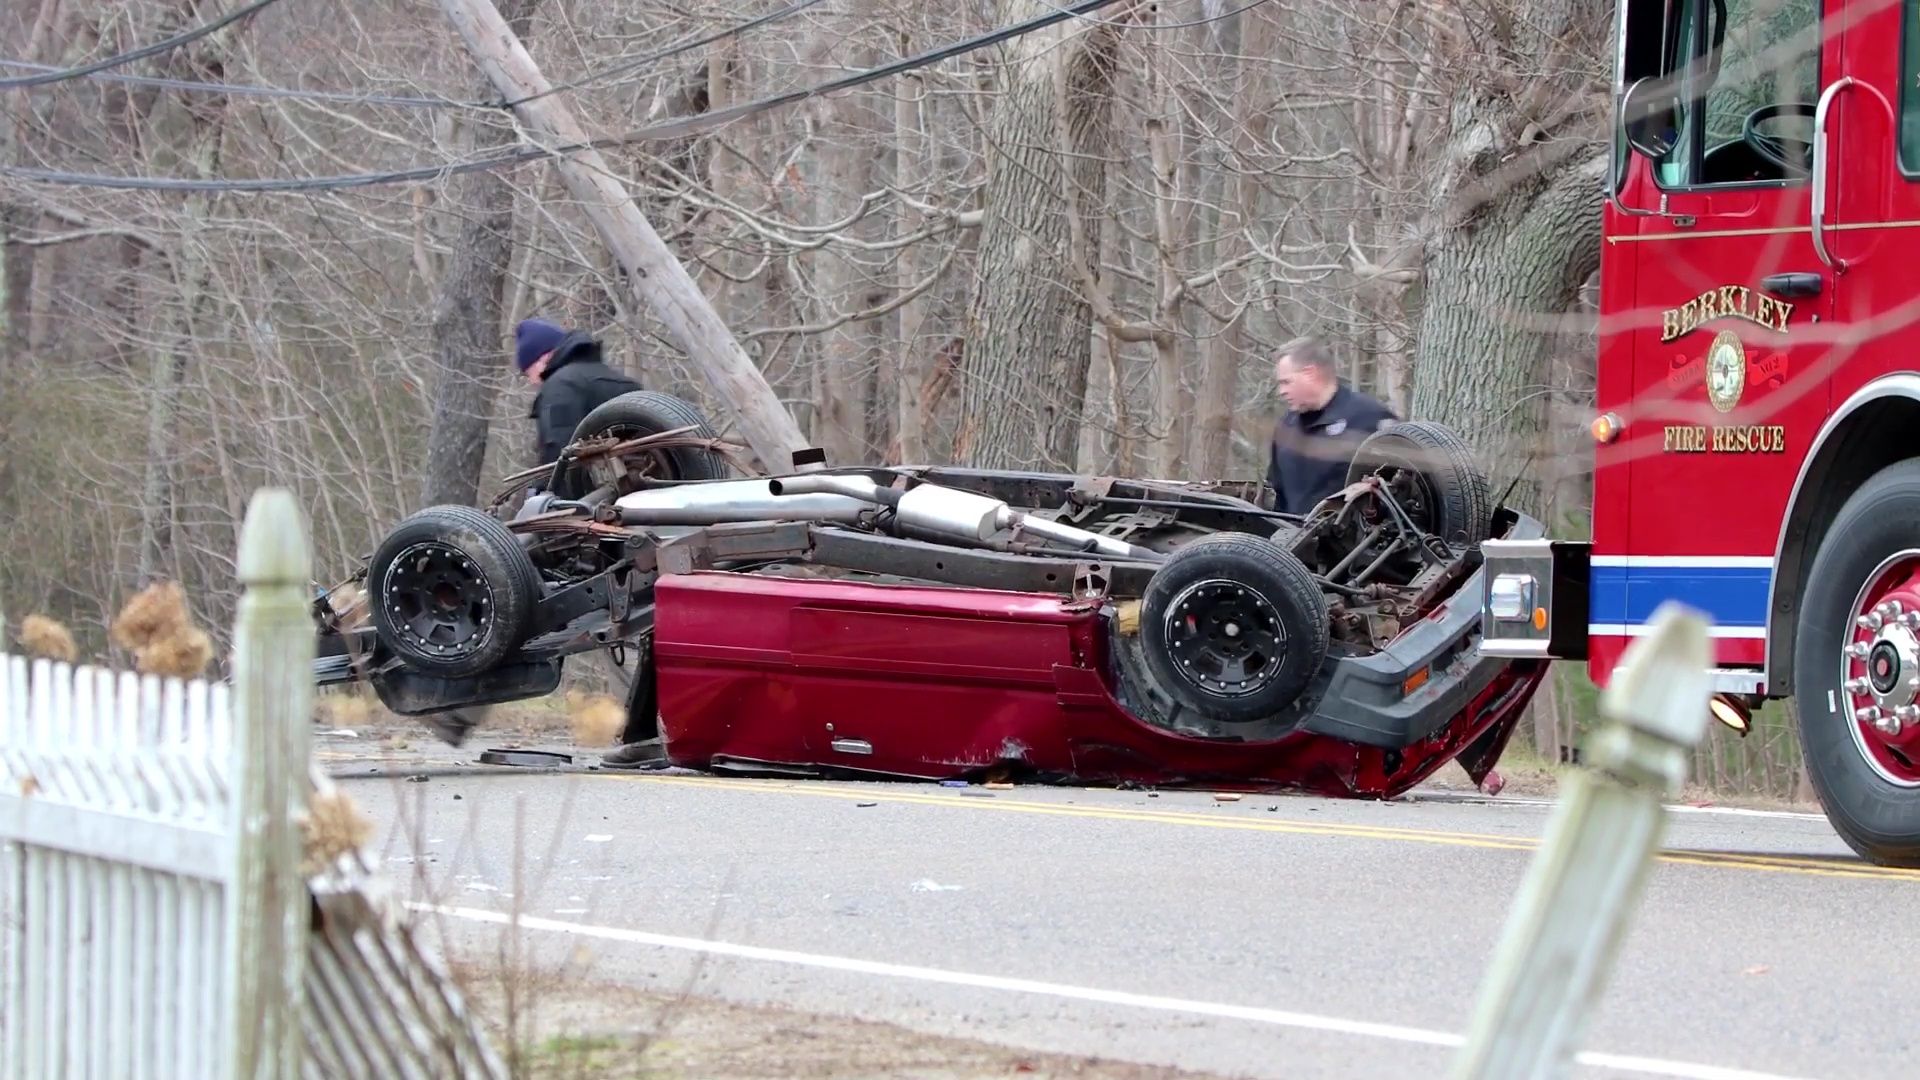 Victims identified three weeks after deadly car crash in Bedford County